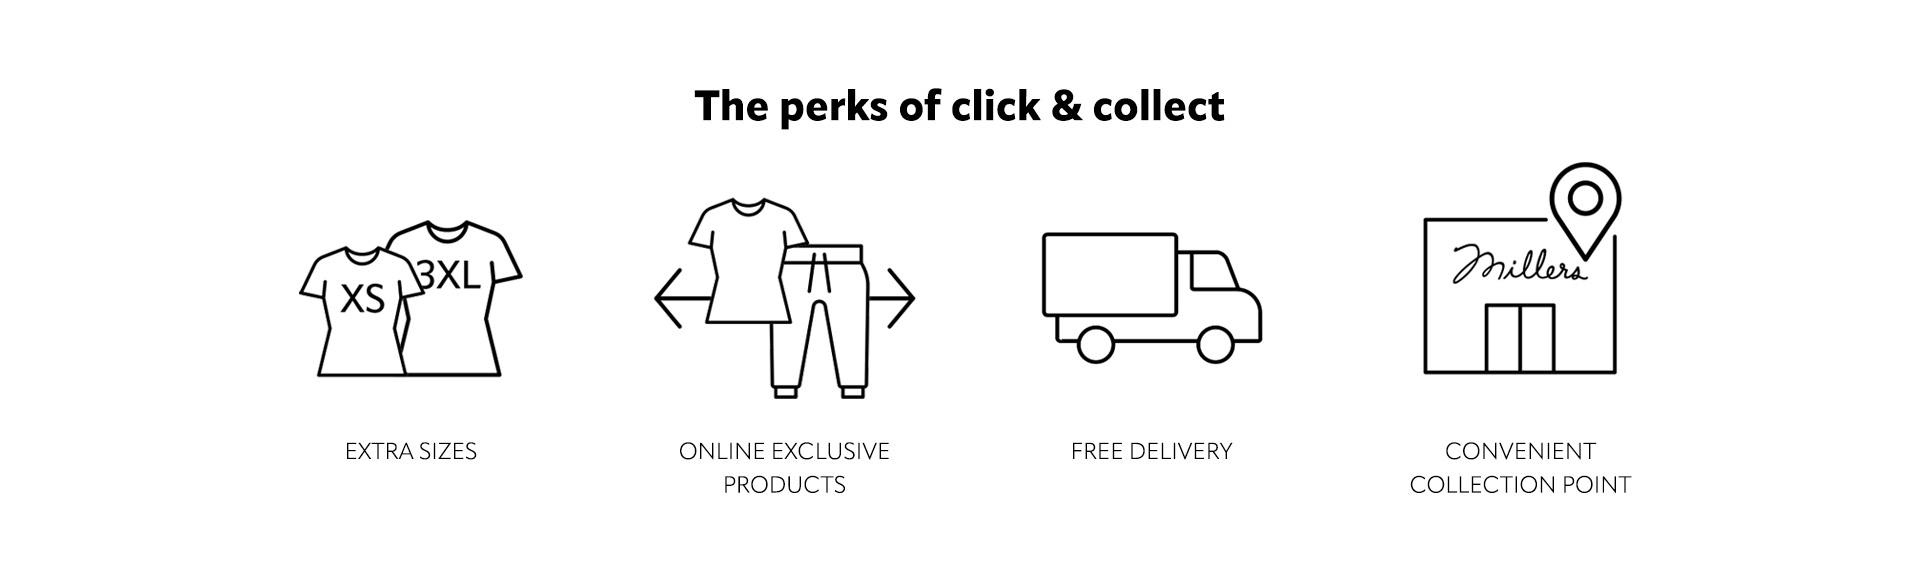 Millers Click and Collect Image